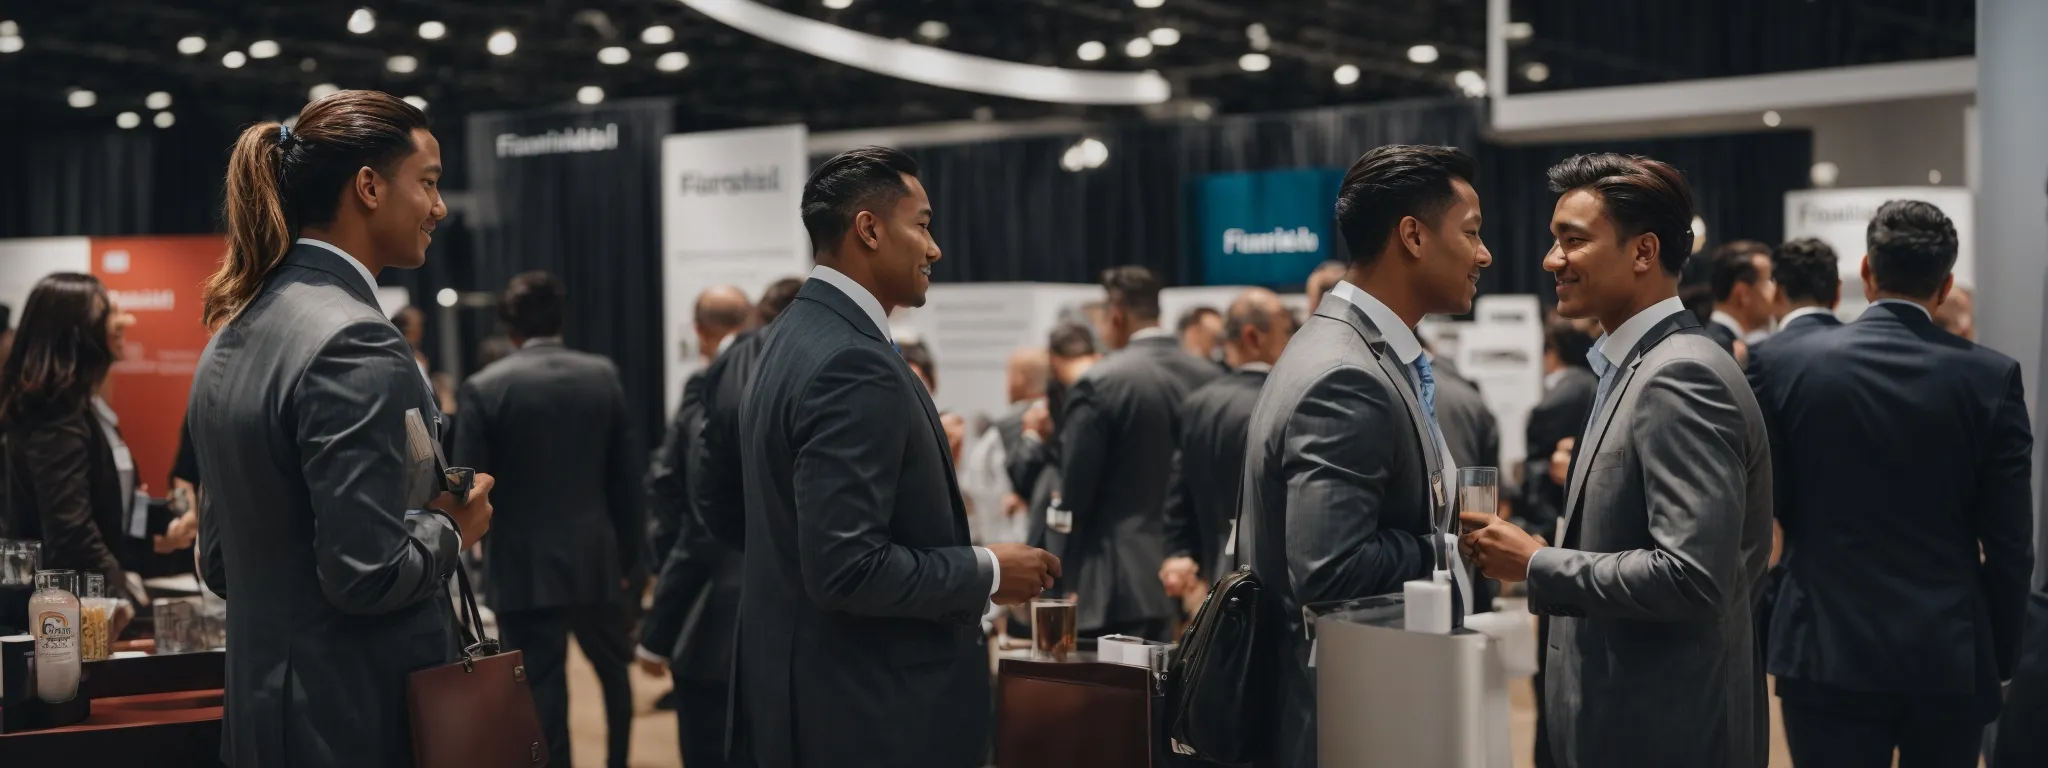 Two Business Representatives From Different Companies Engaging In A Friendly Conversation In Front Of Their Exhibition Stands At A Bustling Social Media Marketing Event.